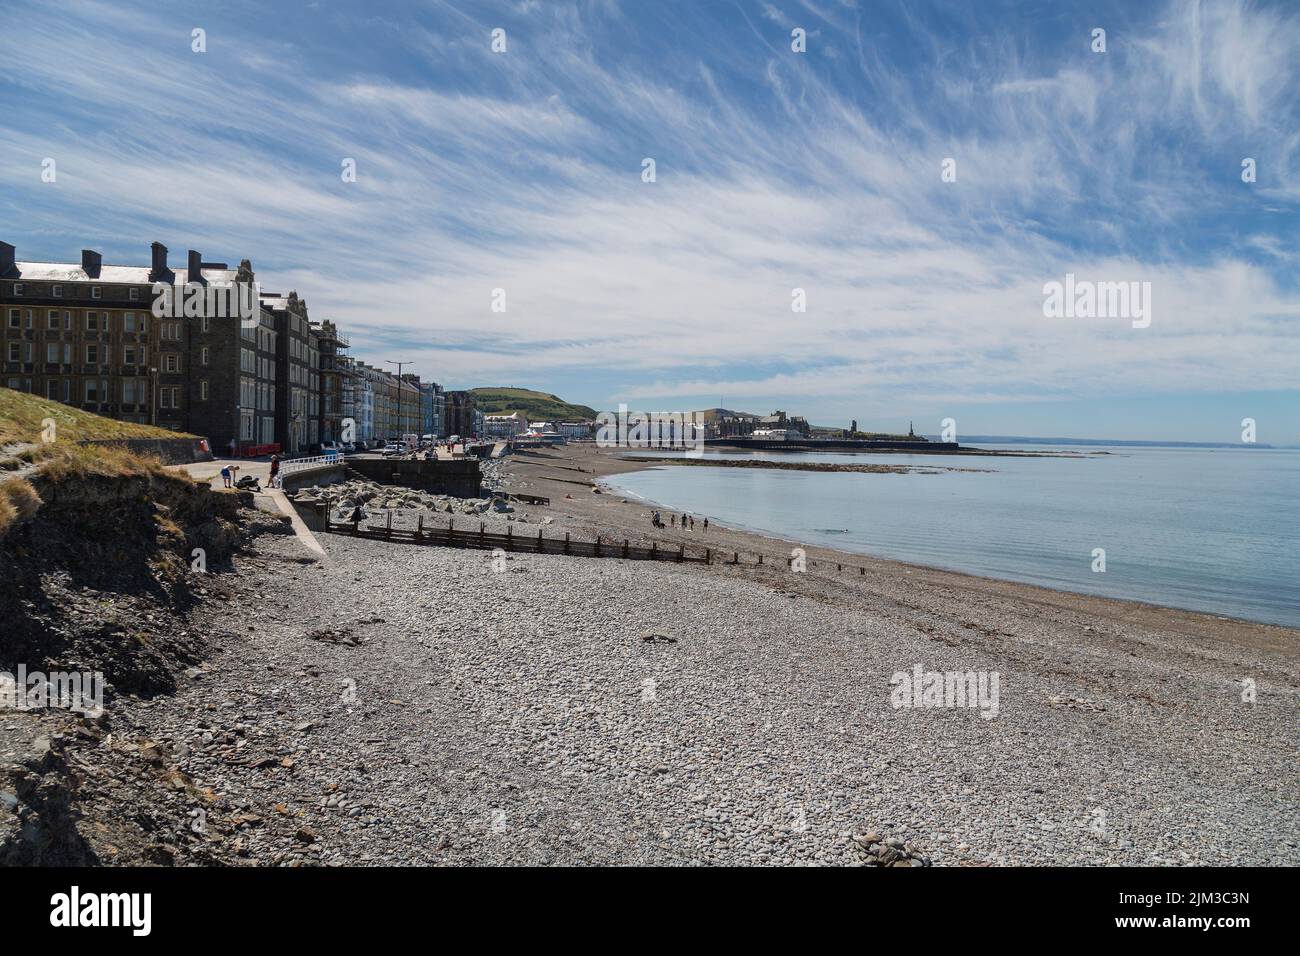 A view of the seafront apartments and hotels, and along the beach at Aberystwyth, Wales. Stock Photo